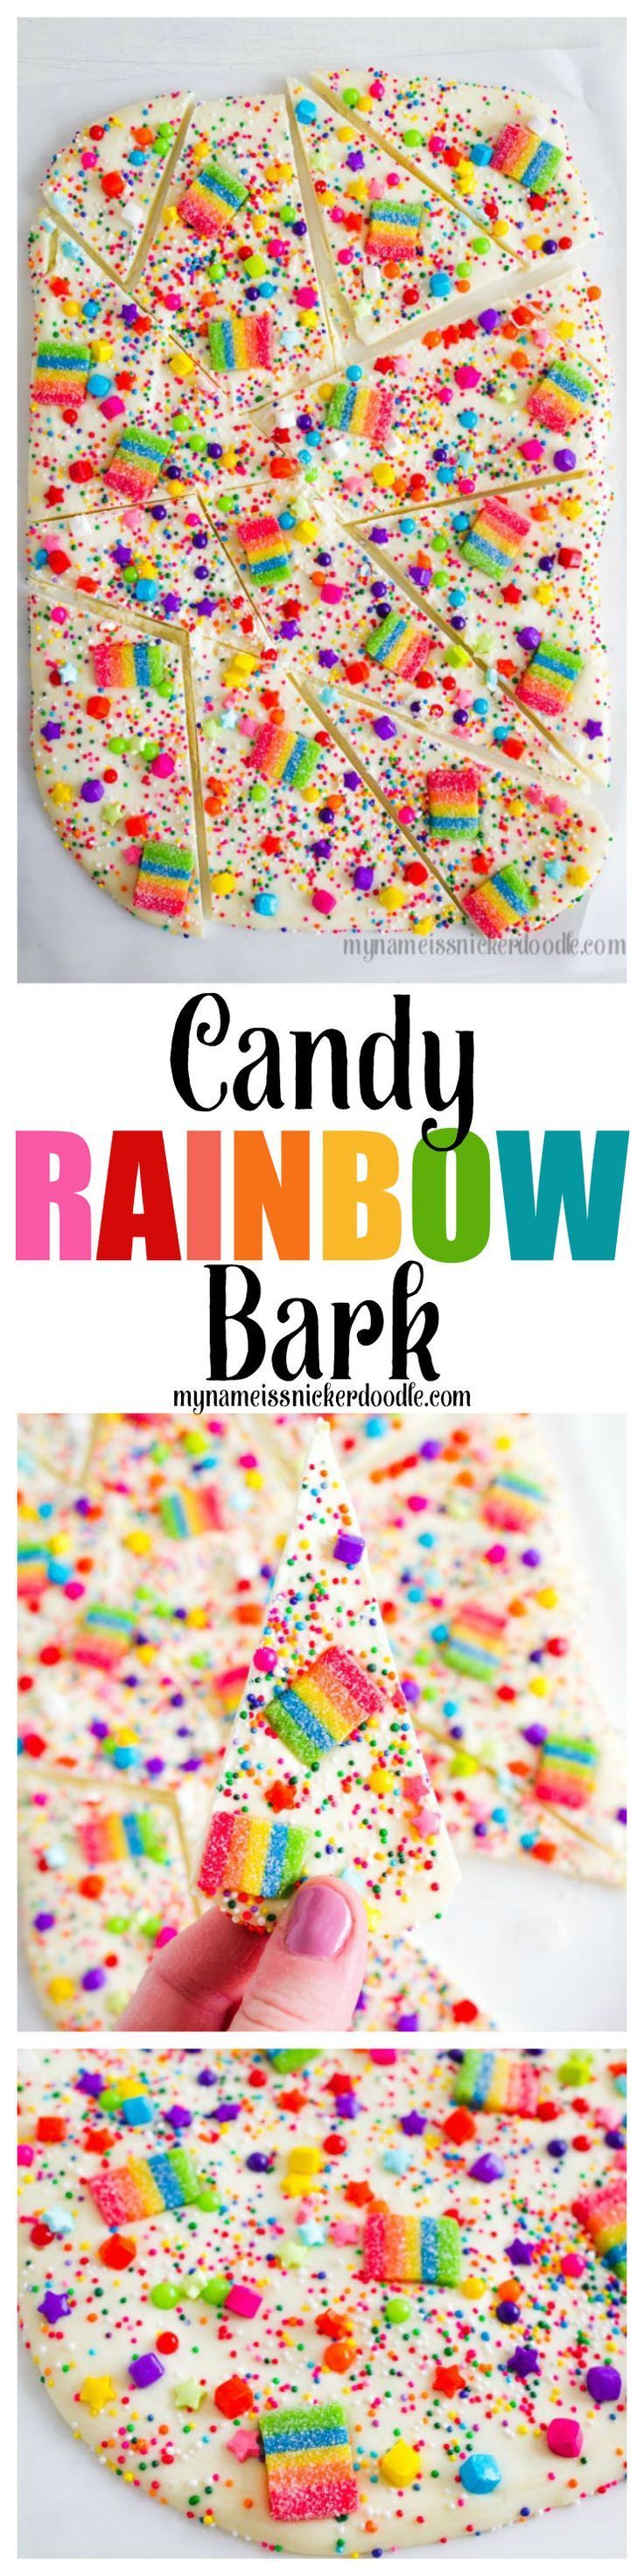 Oh my adorableness!  This Candy Rainbow Bark would be perfect for a birthday party, St. Patrick’s Day or just to cheer someone up!